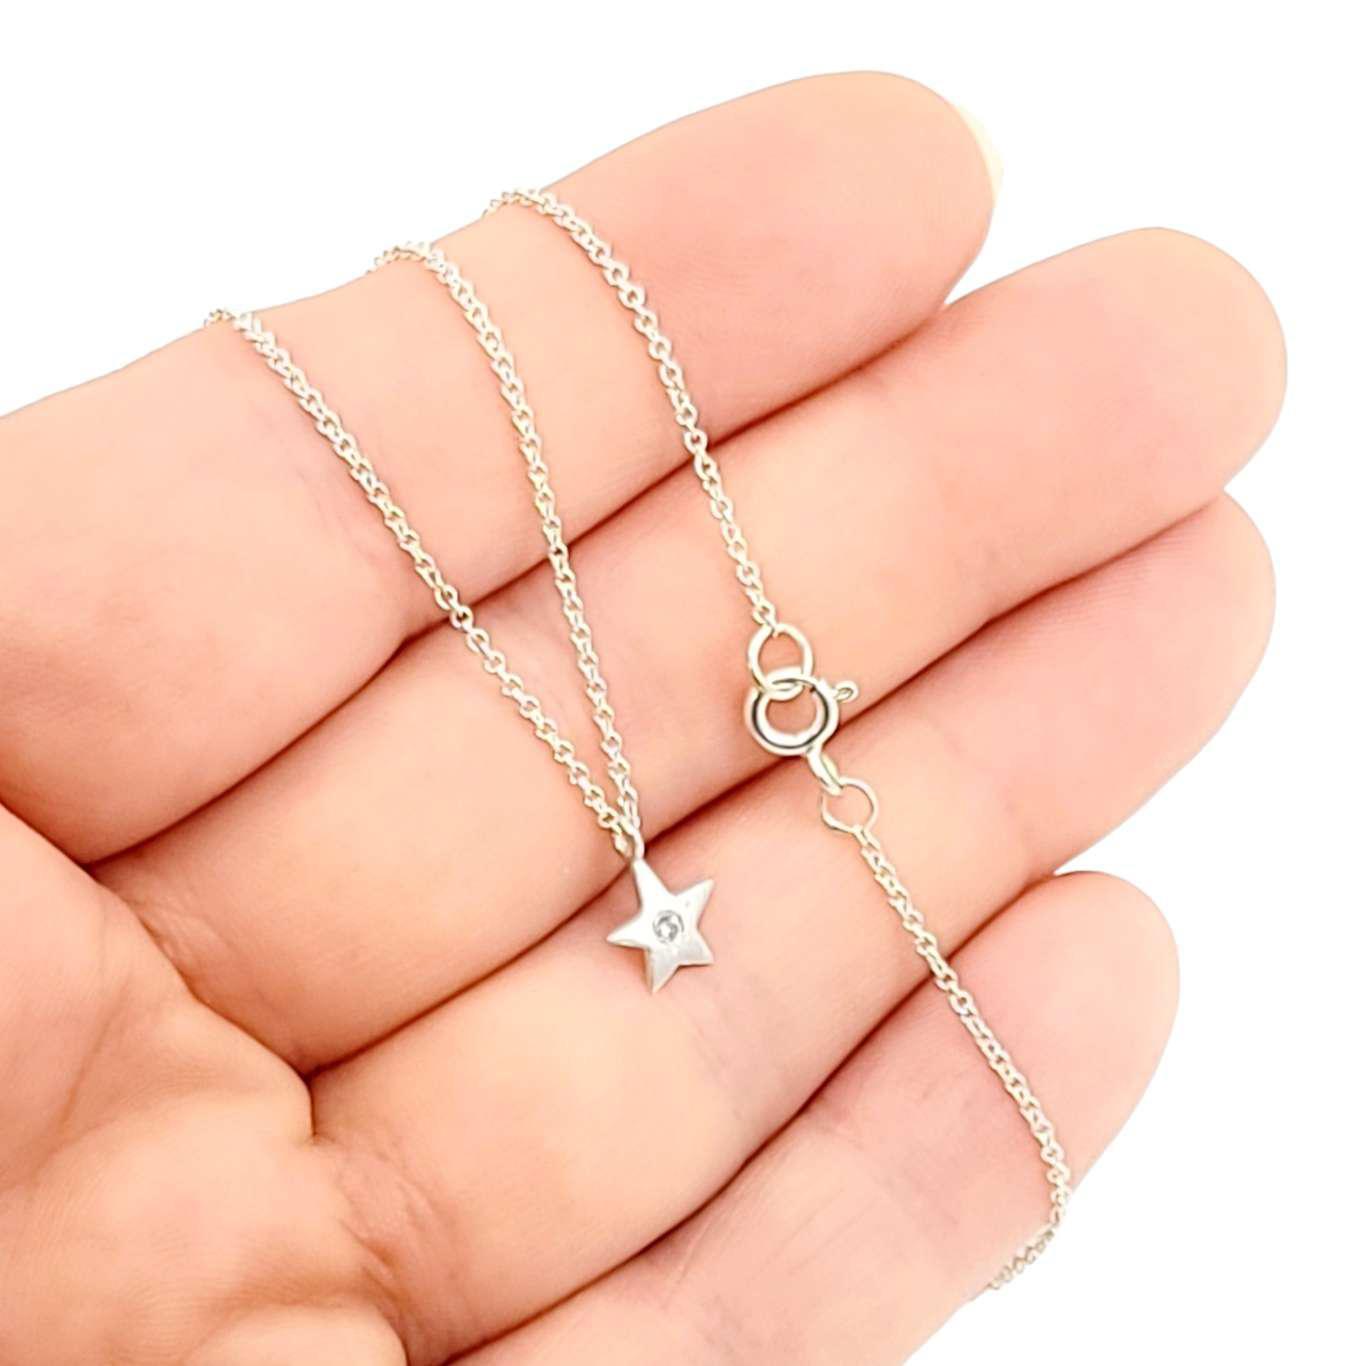 Necklace - Diamond Solitaire Star in Sterling Silver by Michelle Chang